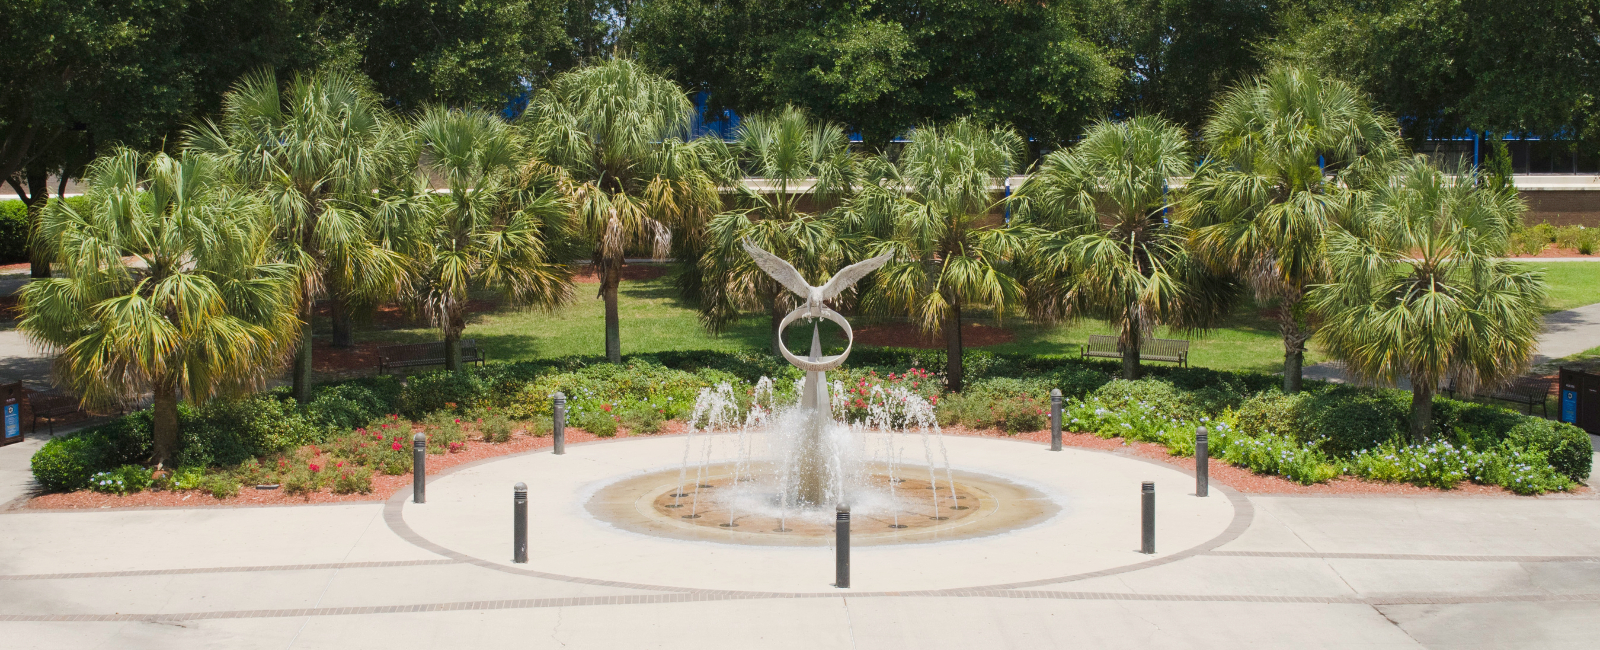 UNF osprey fountain on campus surrounded by greenery and palm trees